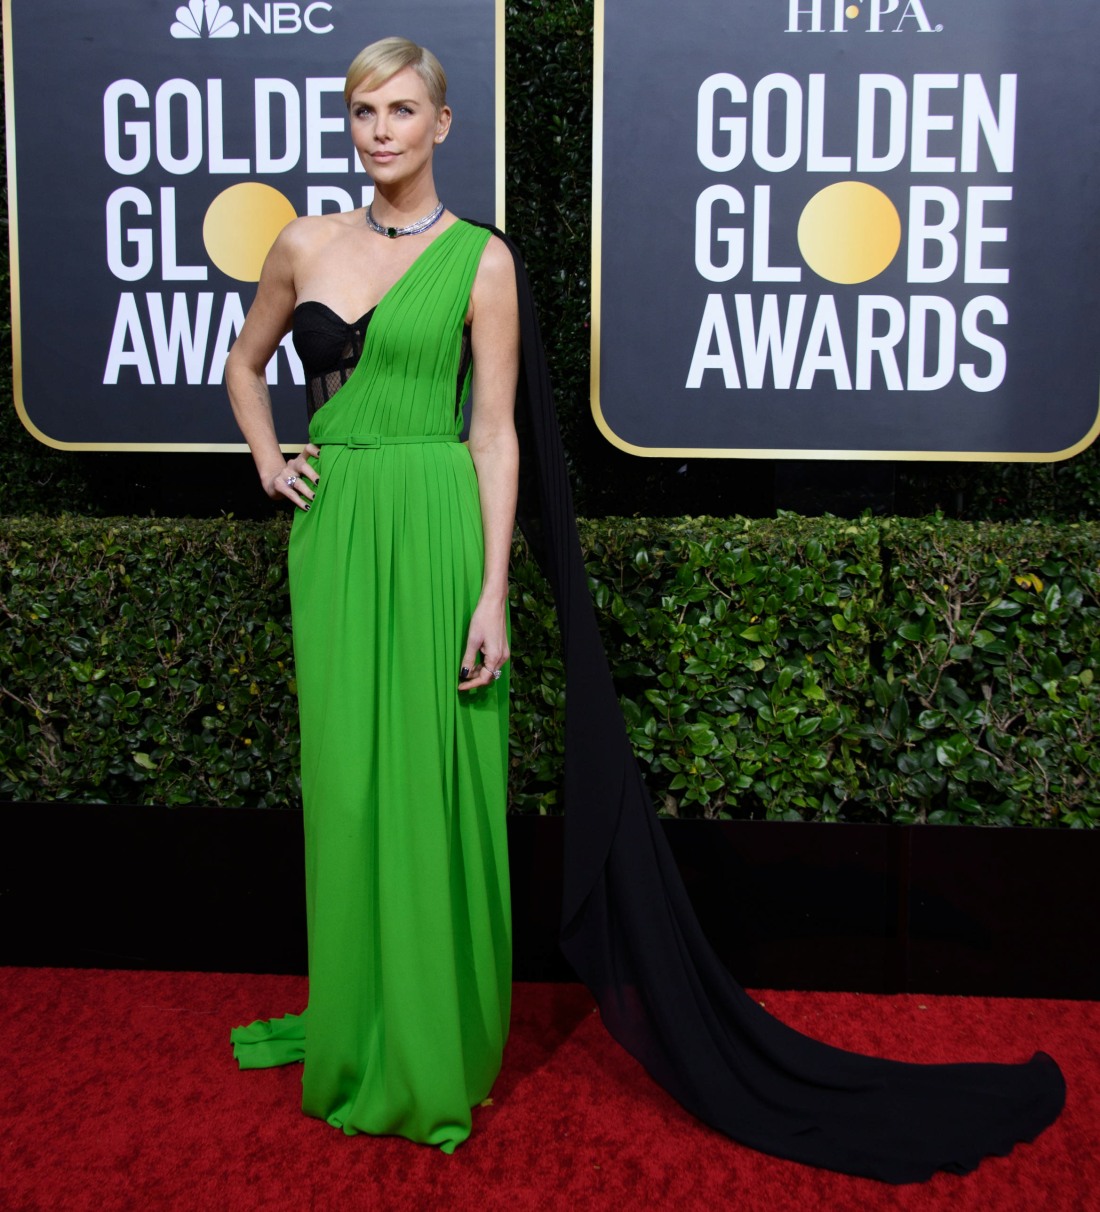 Nominee, Charlize Theron, arrives at the 77th Annual Golden Globe Awards at the Beverly Hilton in Beverly Hills, CA on Sunday, January 5, 2020.